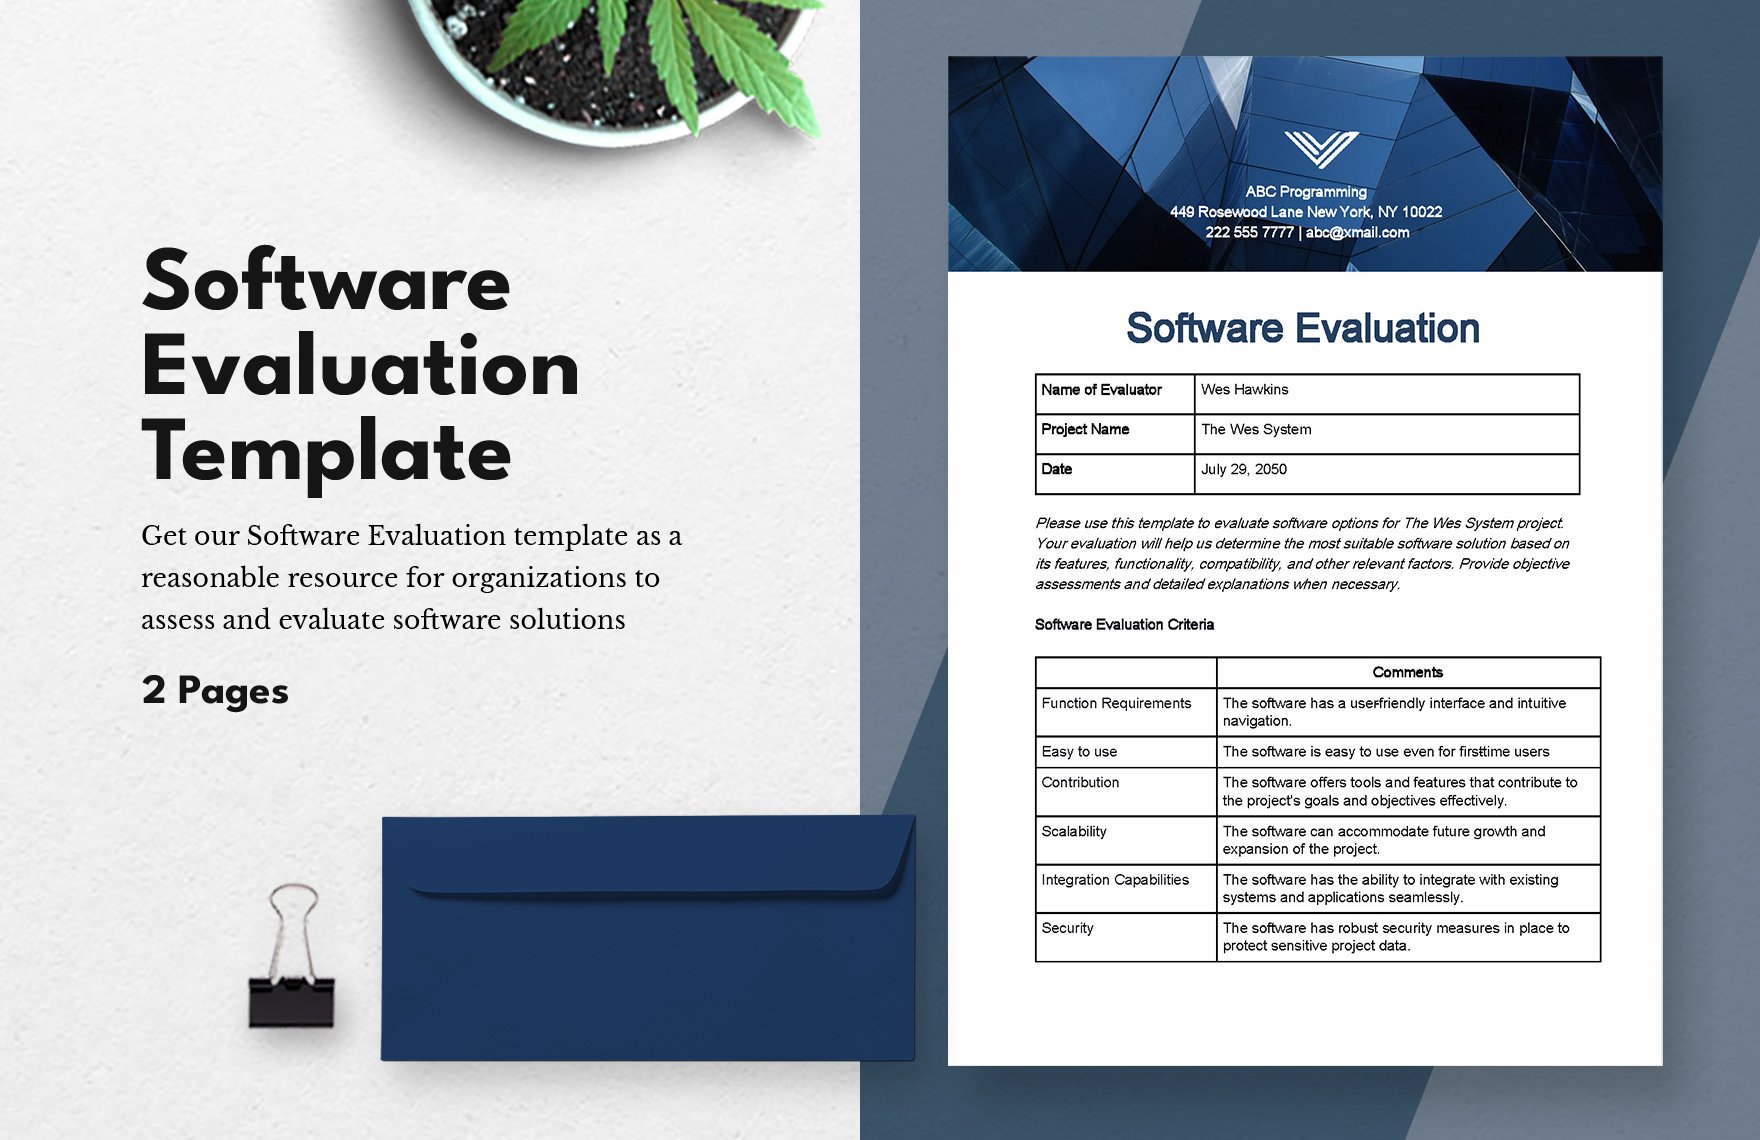 Software Evaluation template   